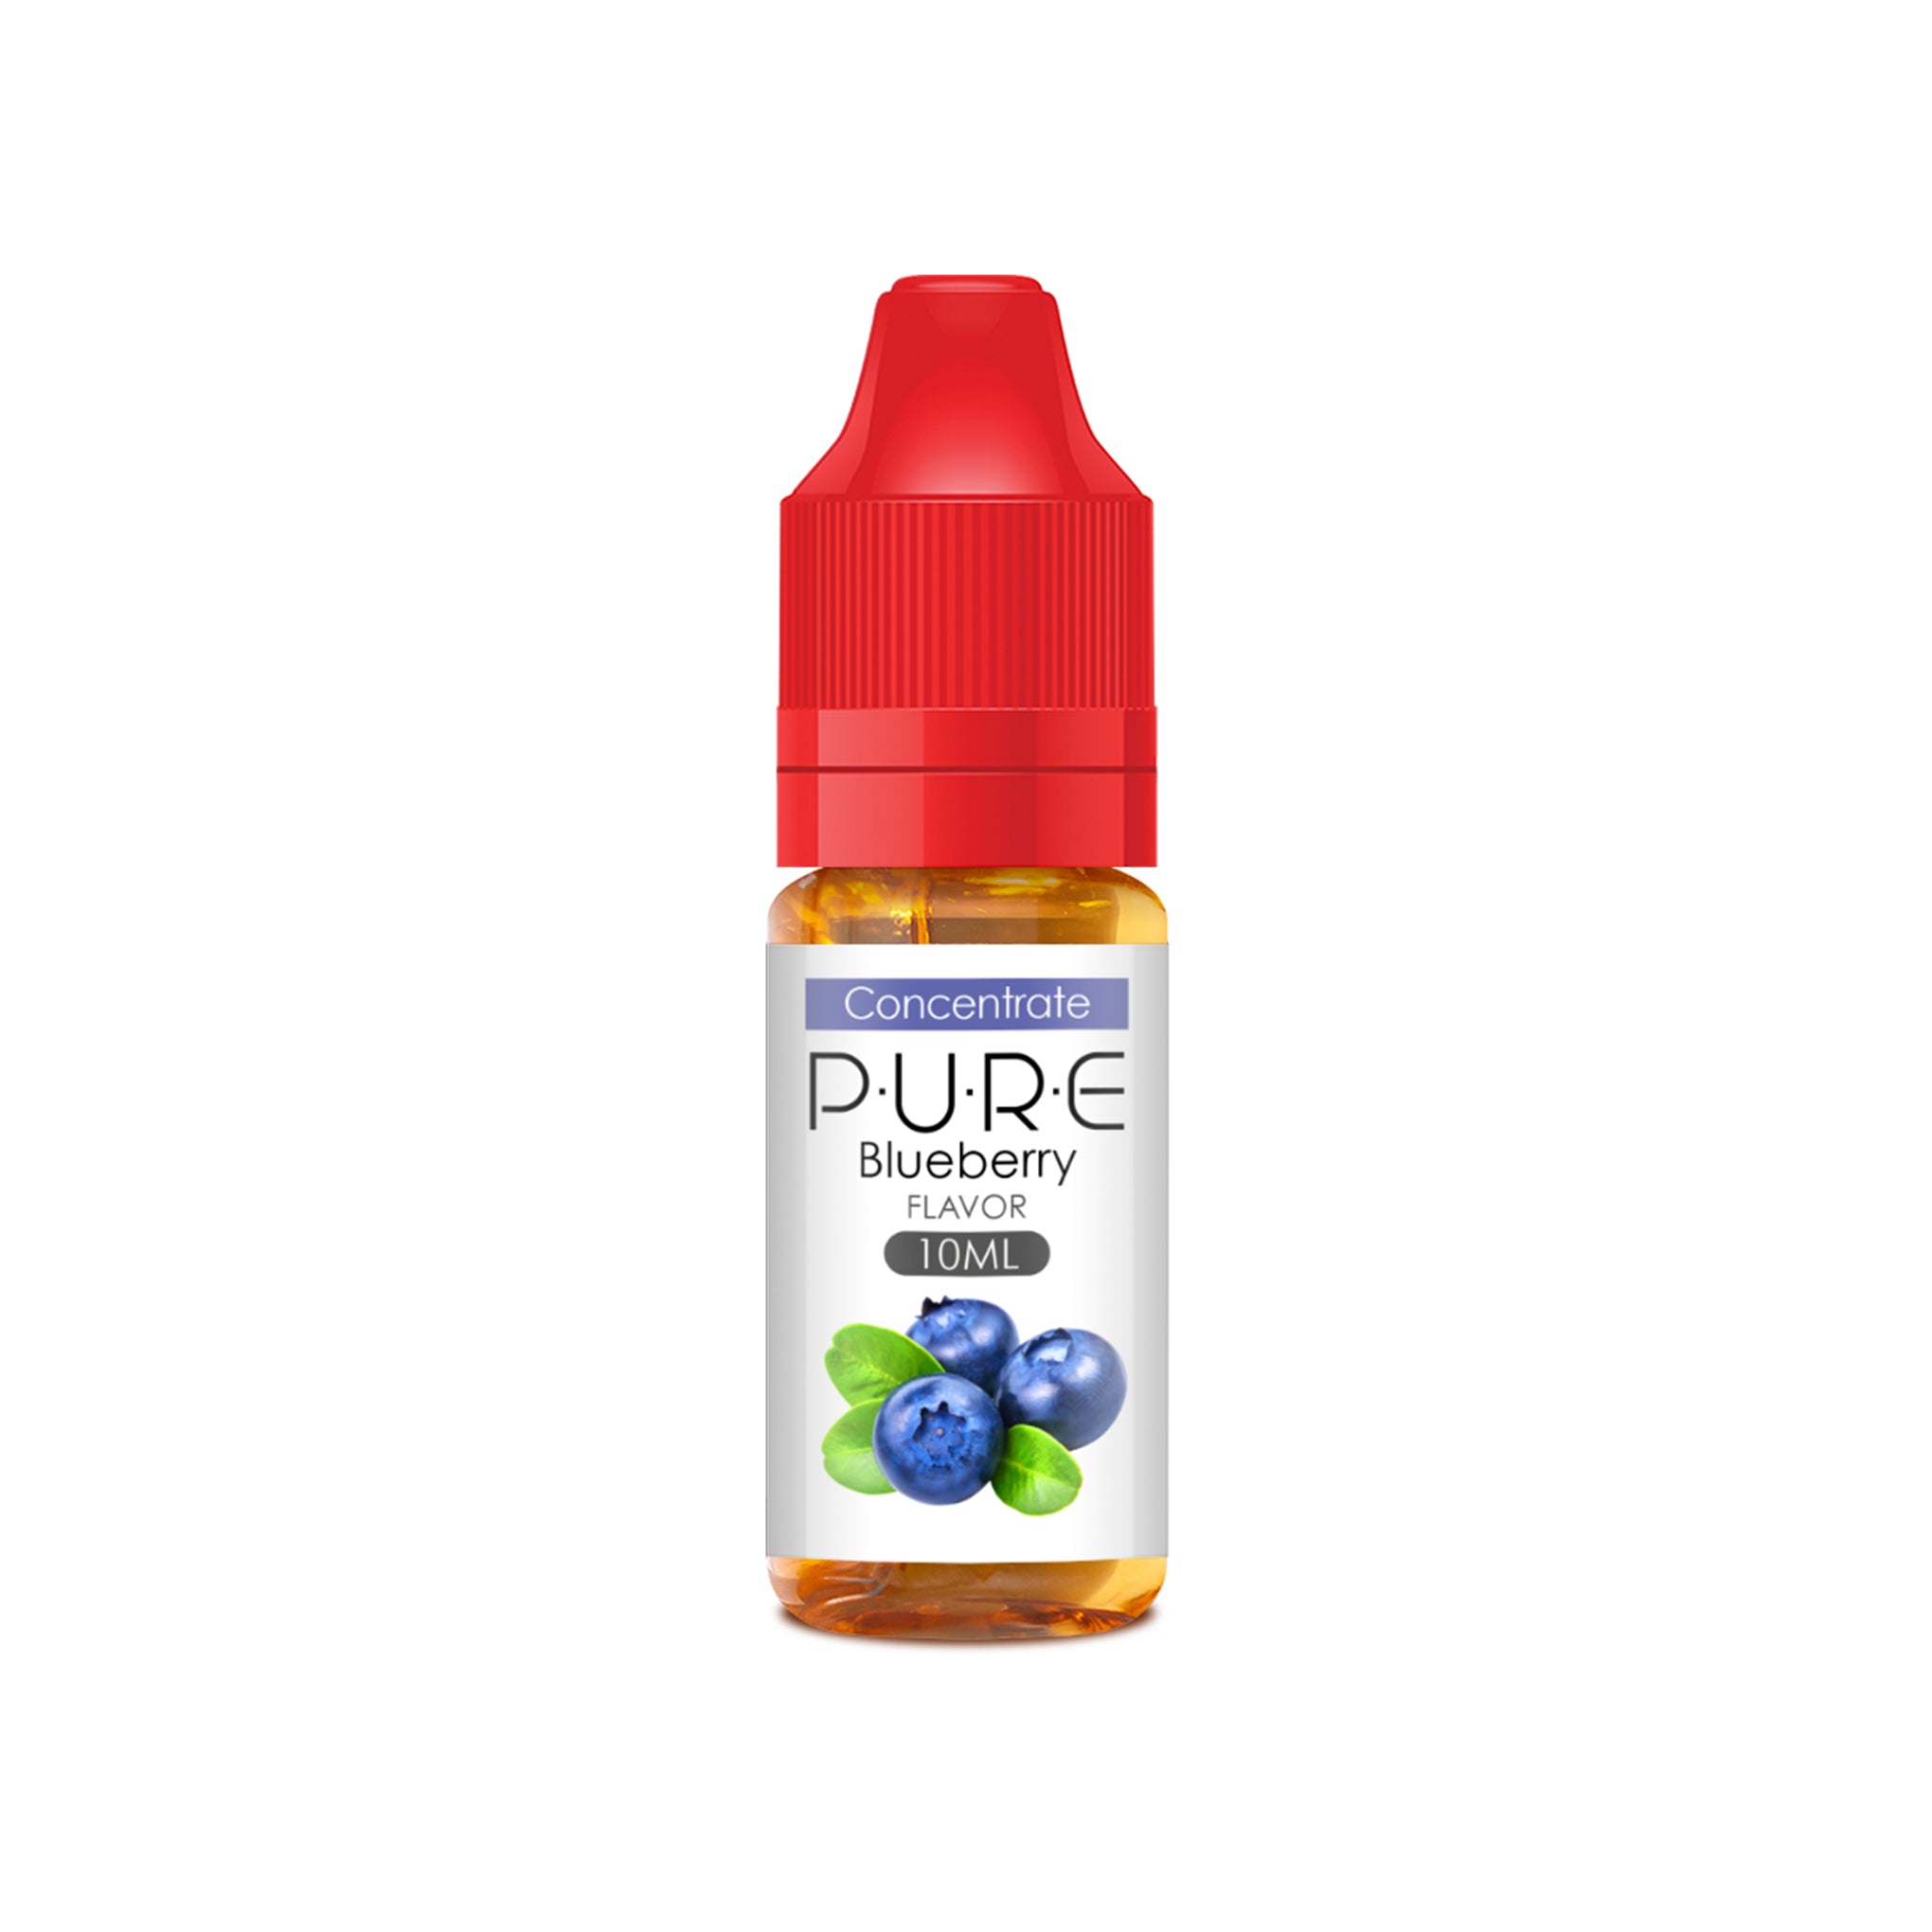 PURE Concentrates Blueberry 